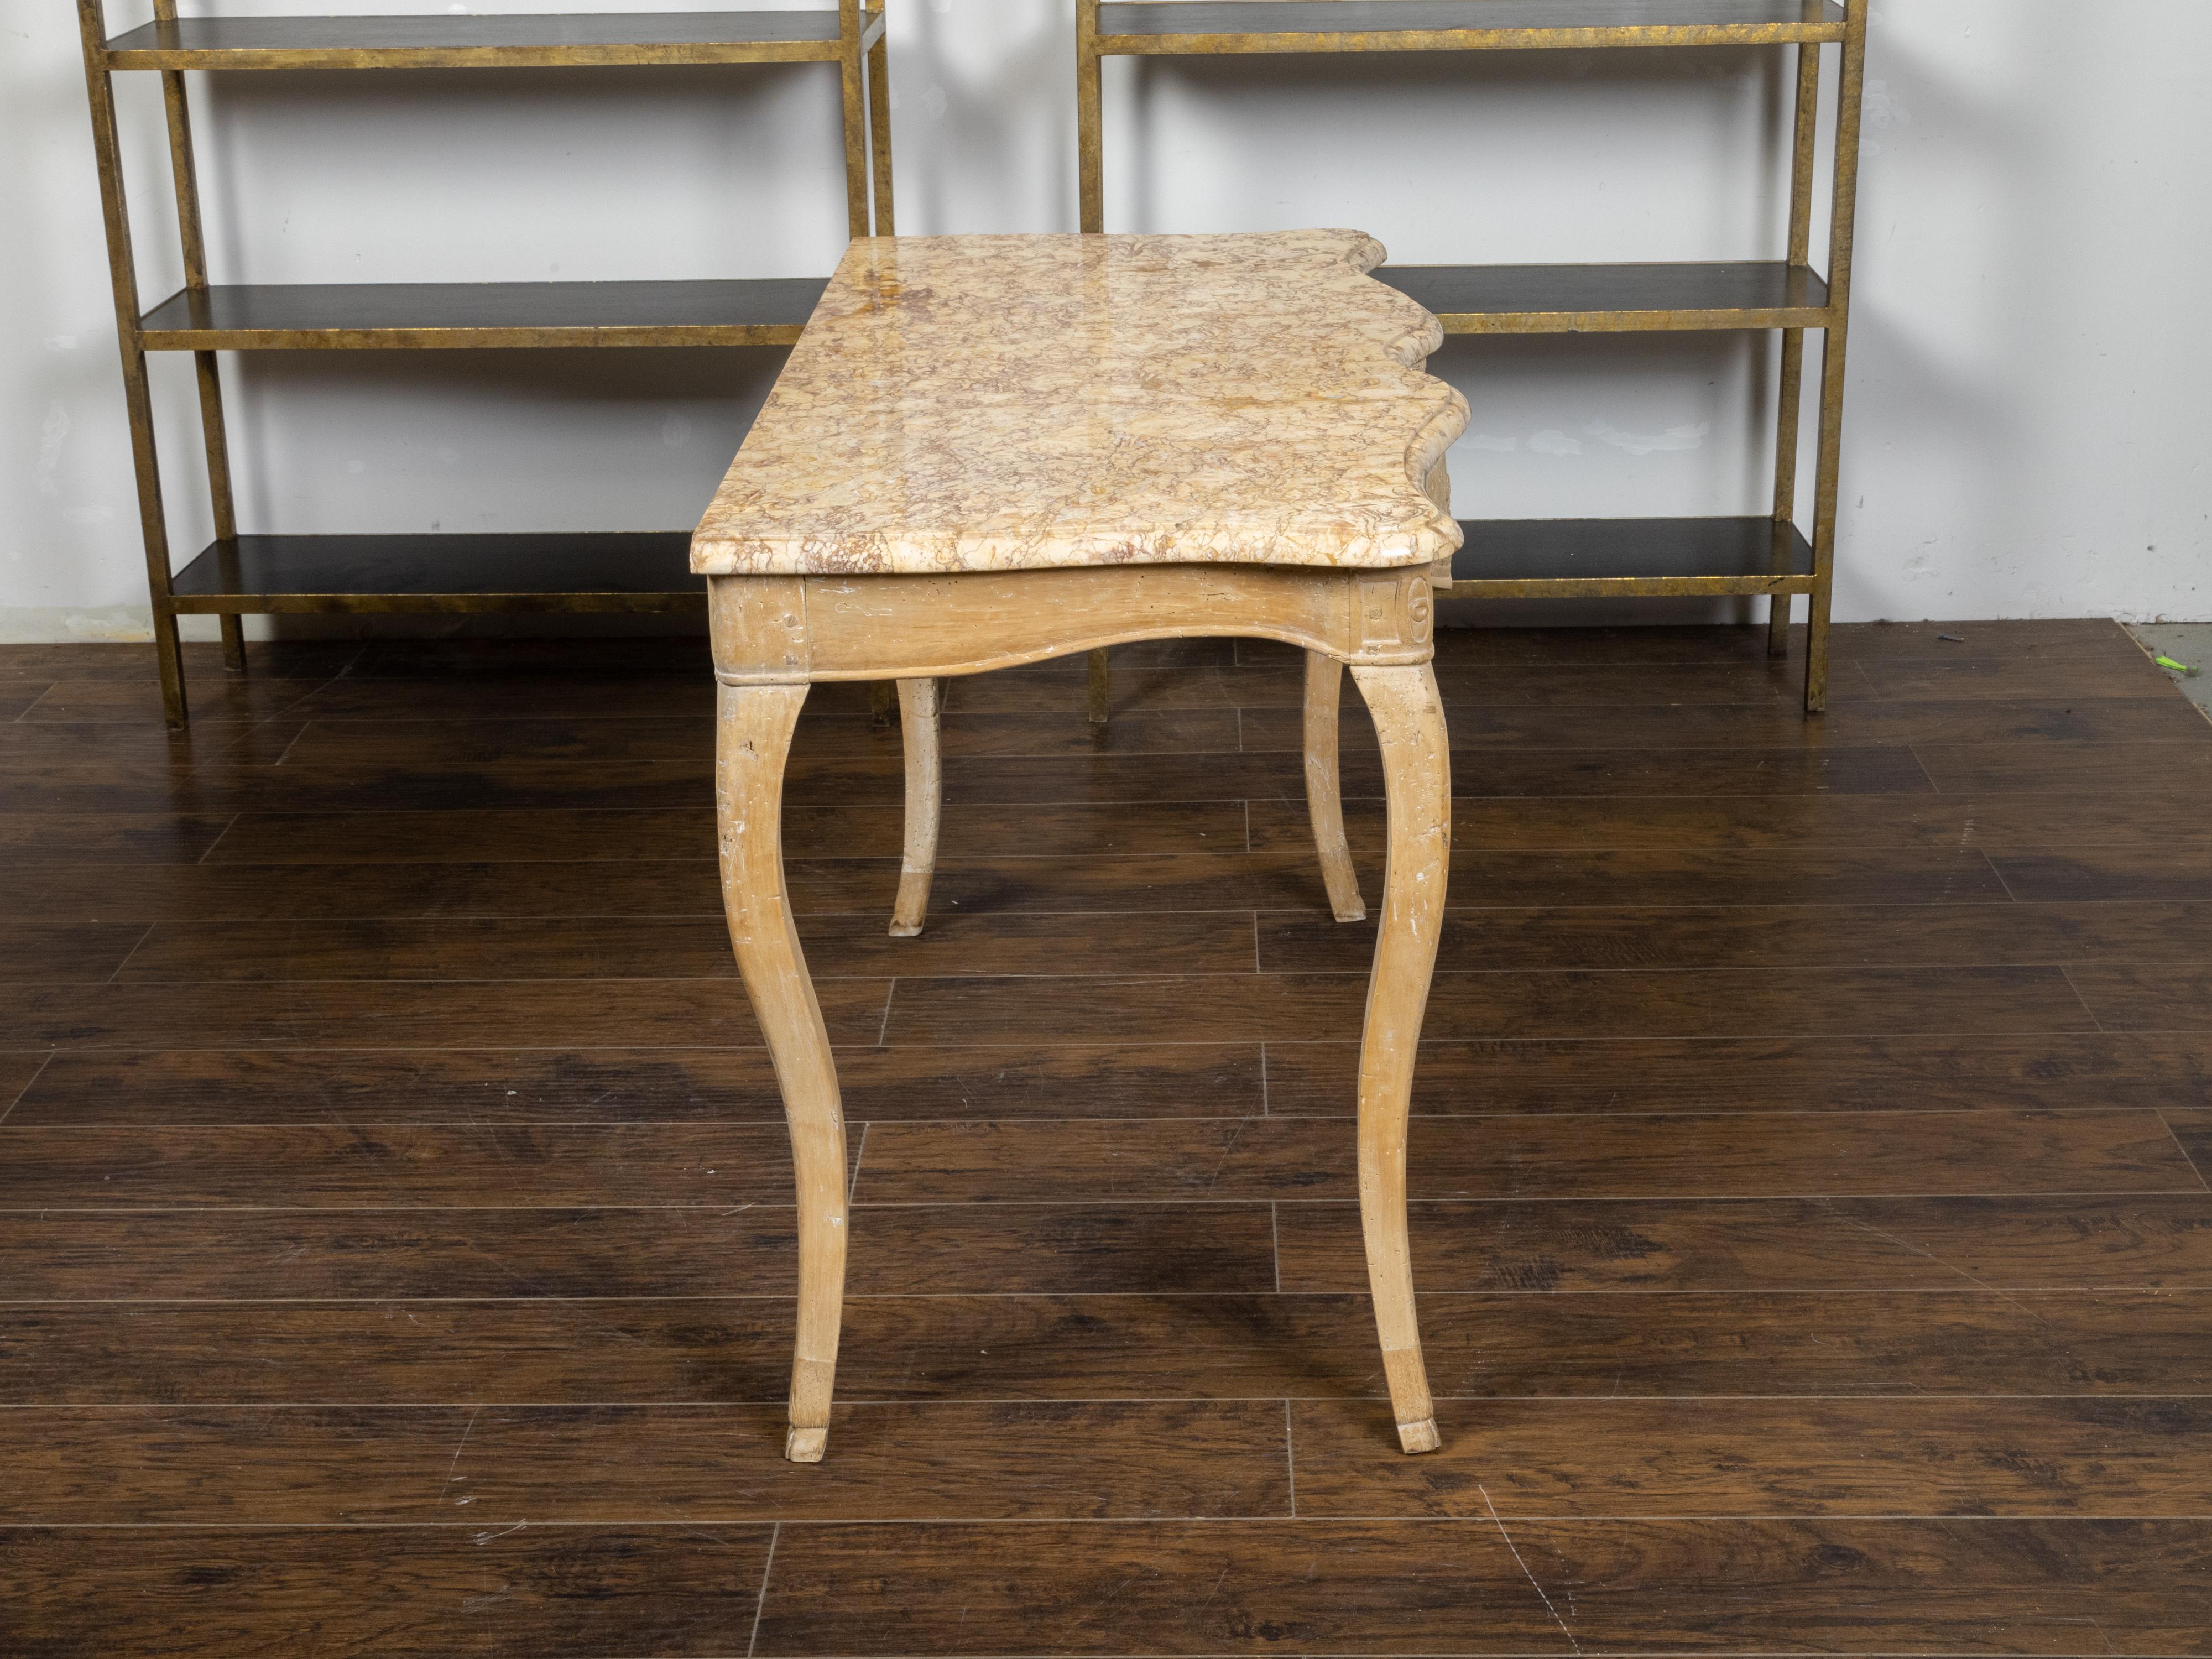 French Rococo 18th Century Beech Wood Marble Top Console Table with Carved Apron For Sale 2